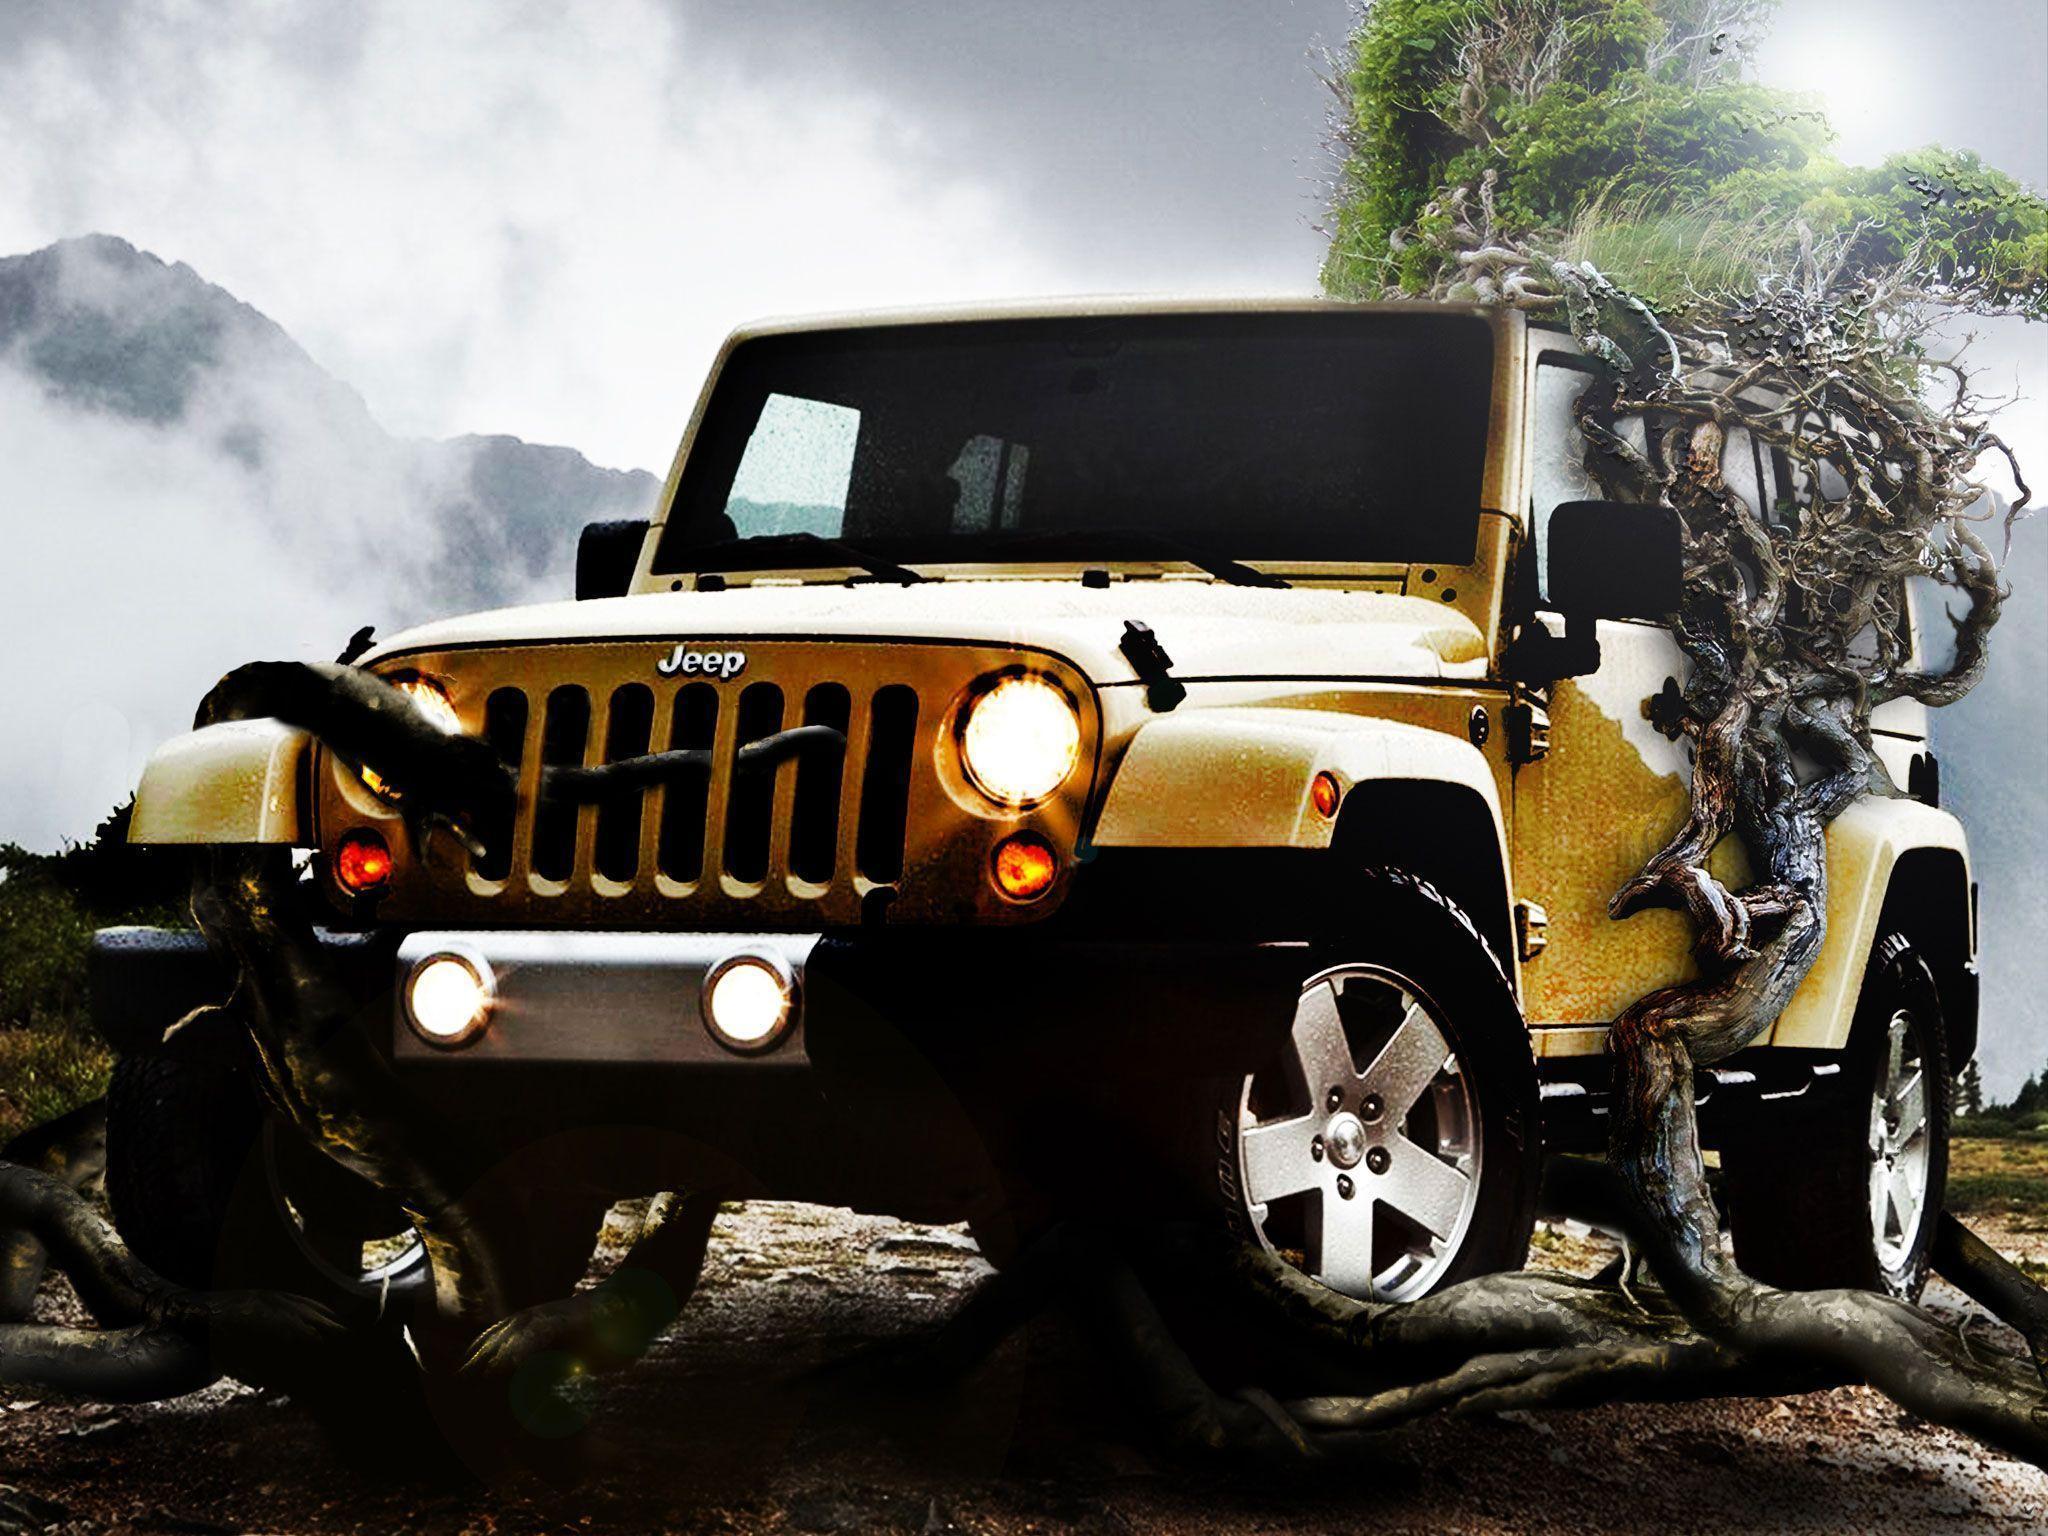 Jeep Wrangler Mudding Photo Wallpapers Jeep Car Wallpapers.